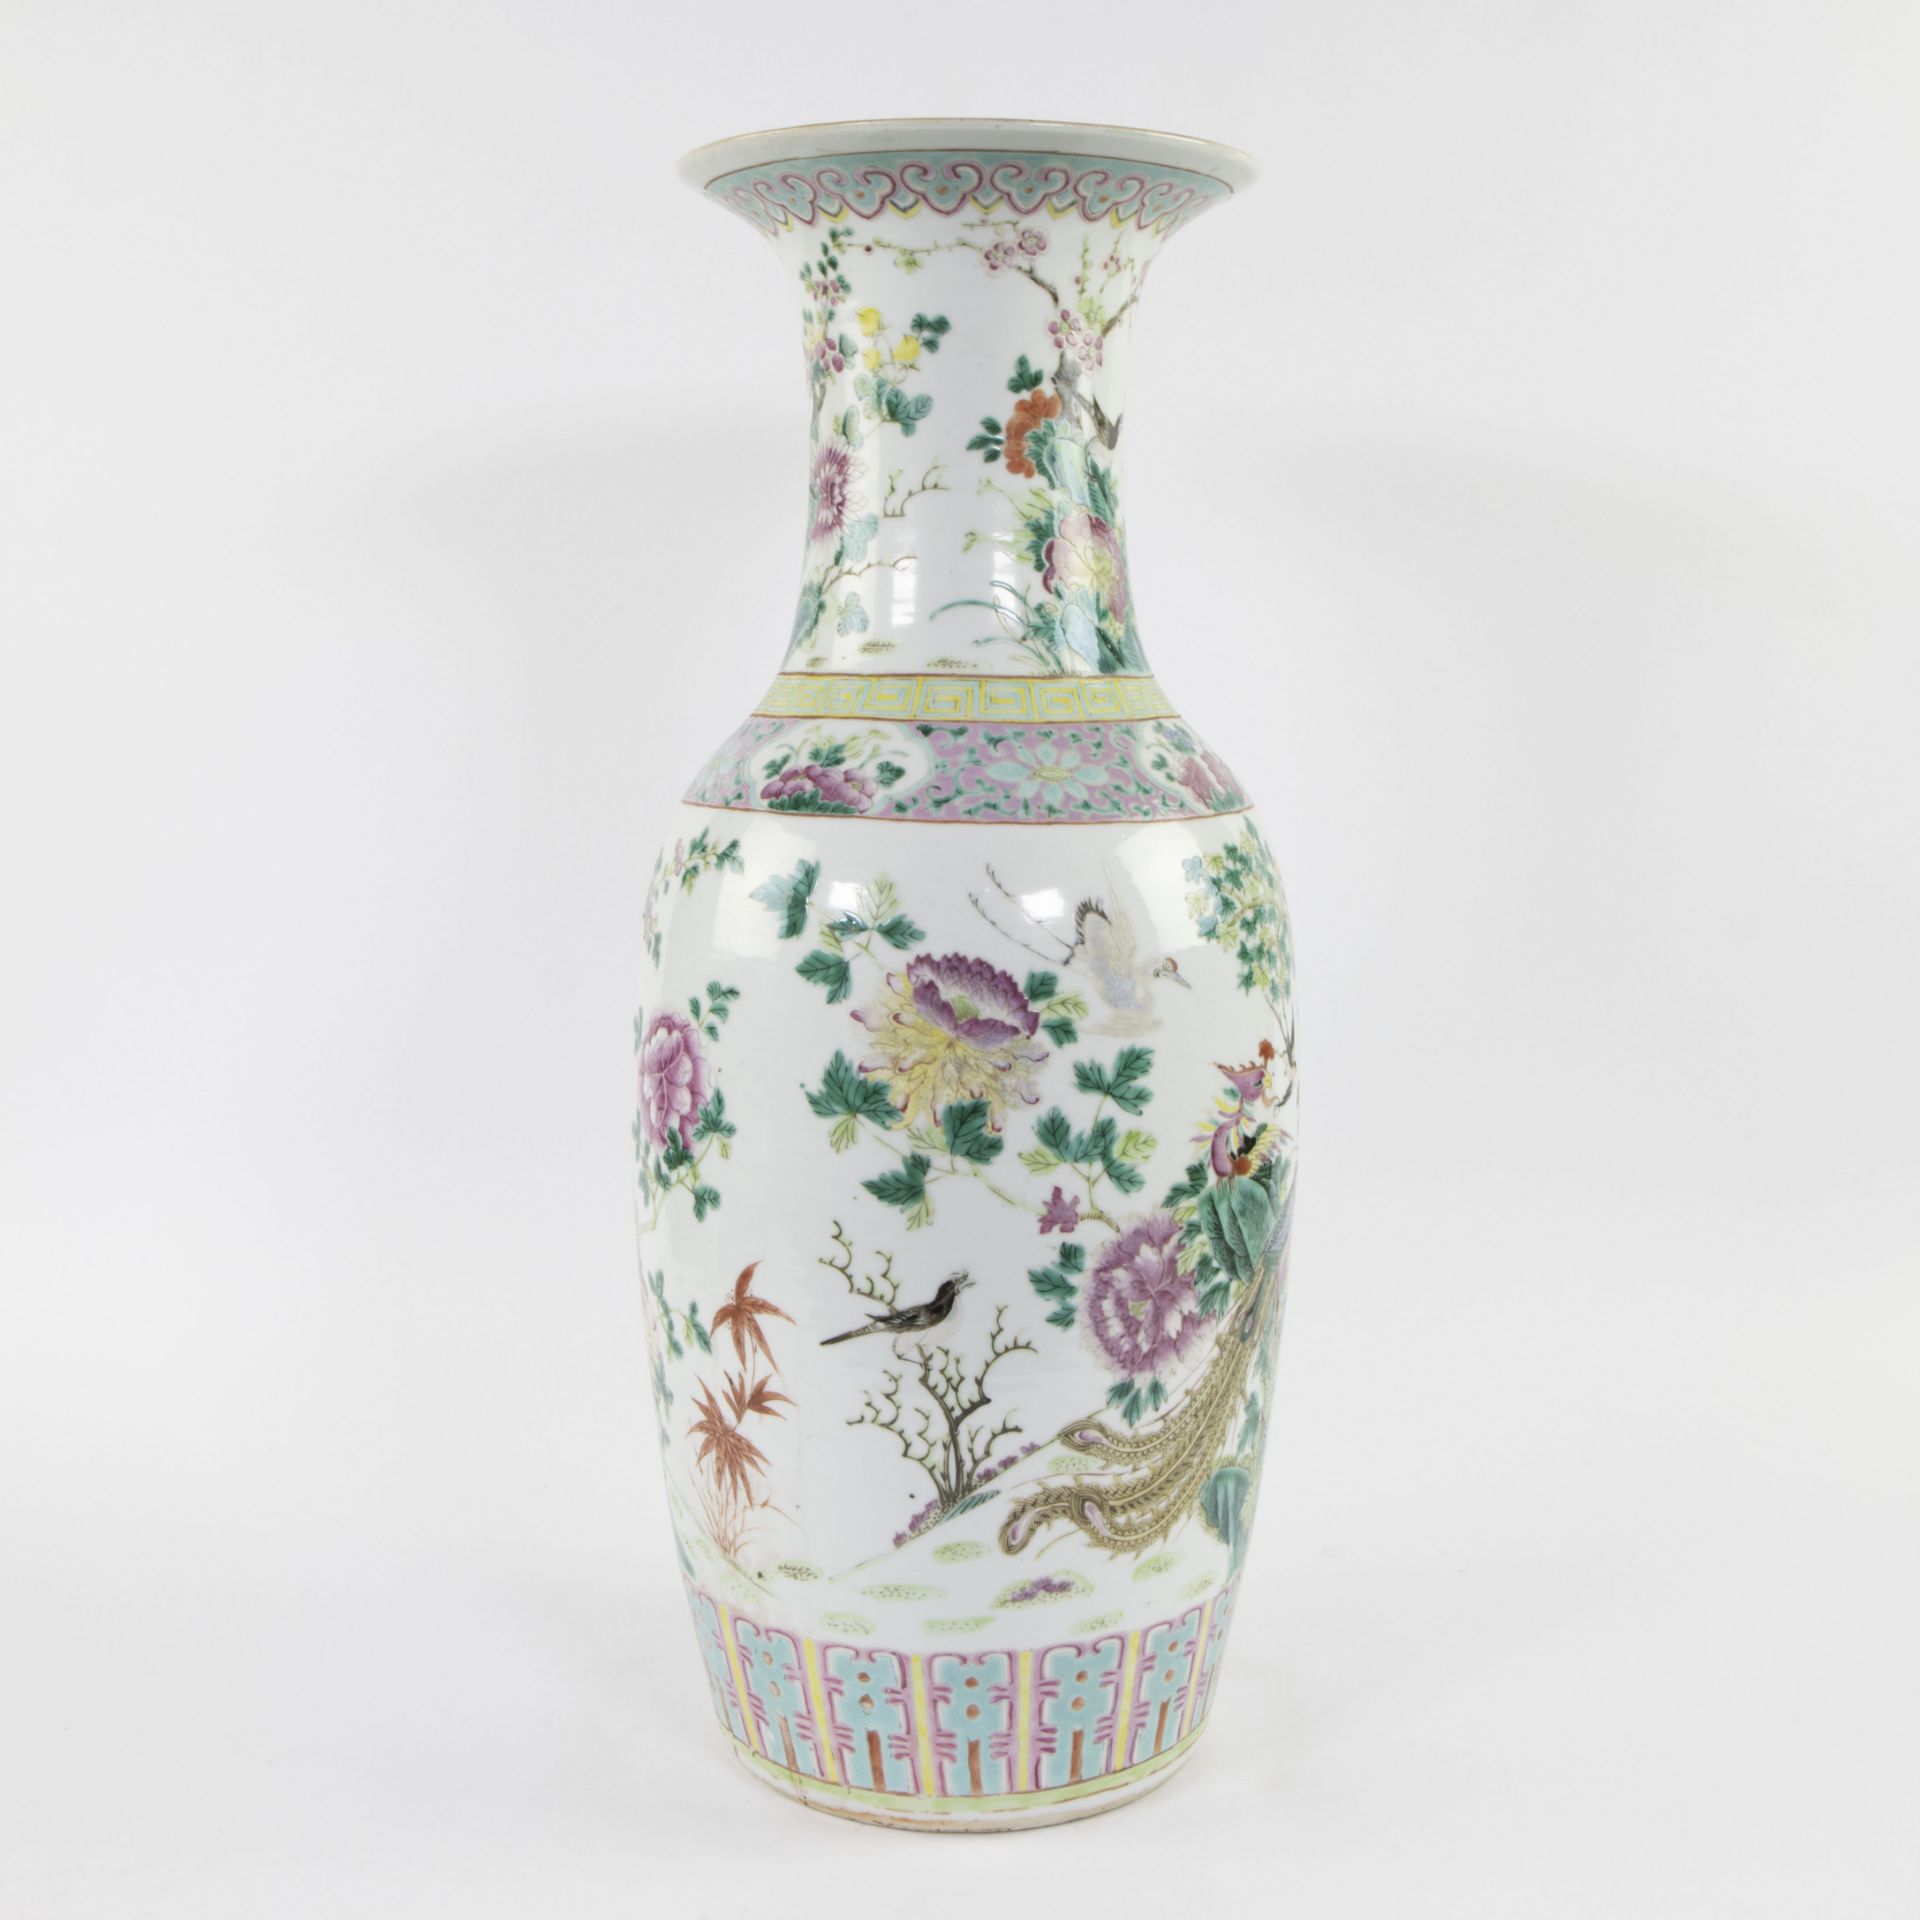 Cinese vase famille rose 19th century - Image 4 of 6